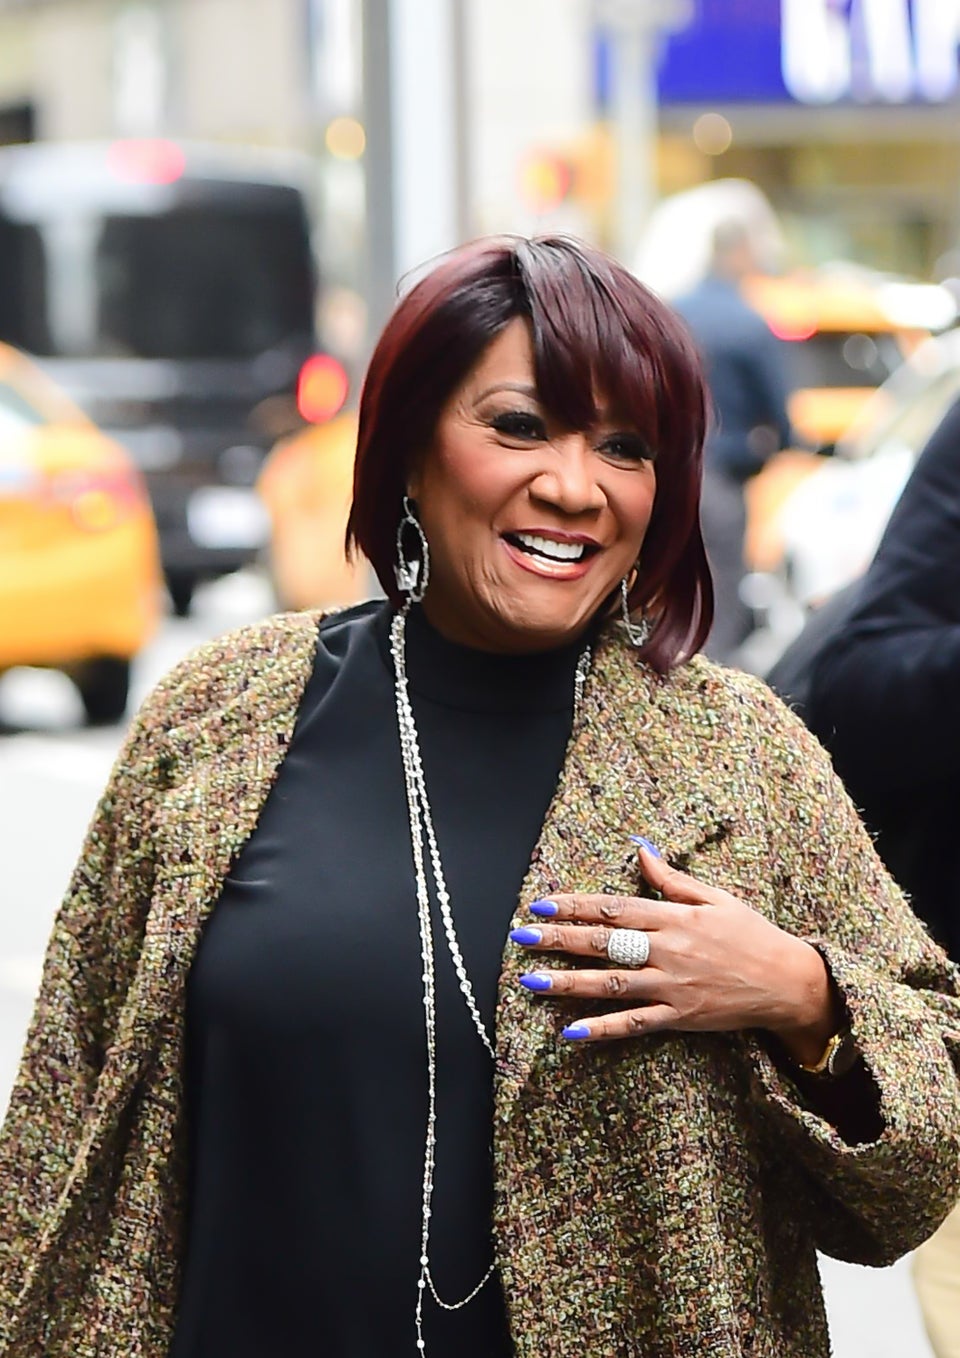 Patti LaBelle Is A National Treasure And Side-Eye Queen